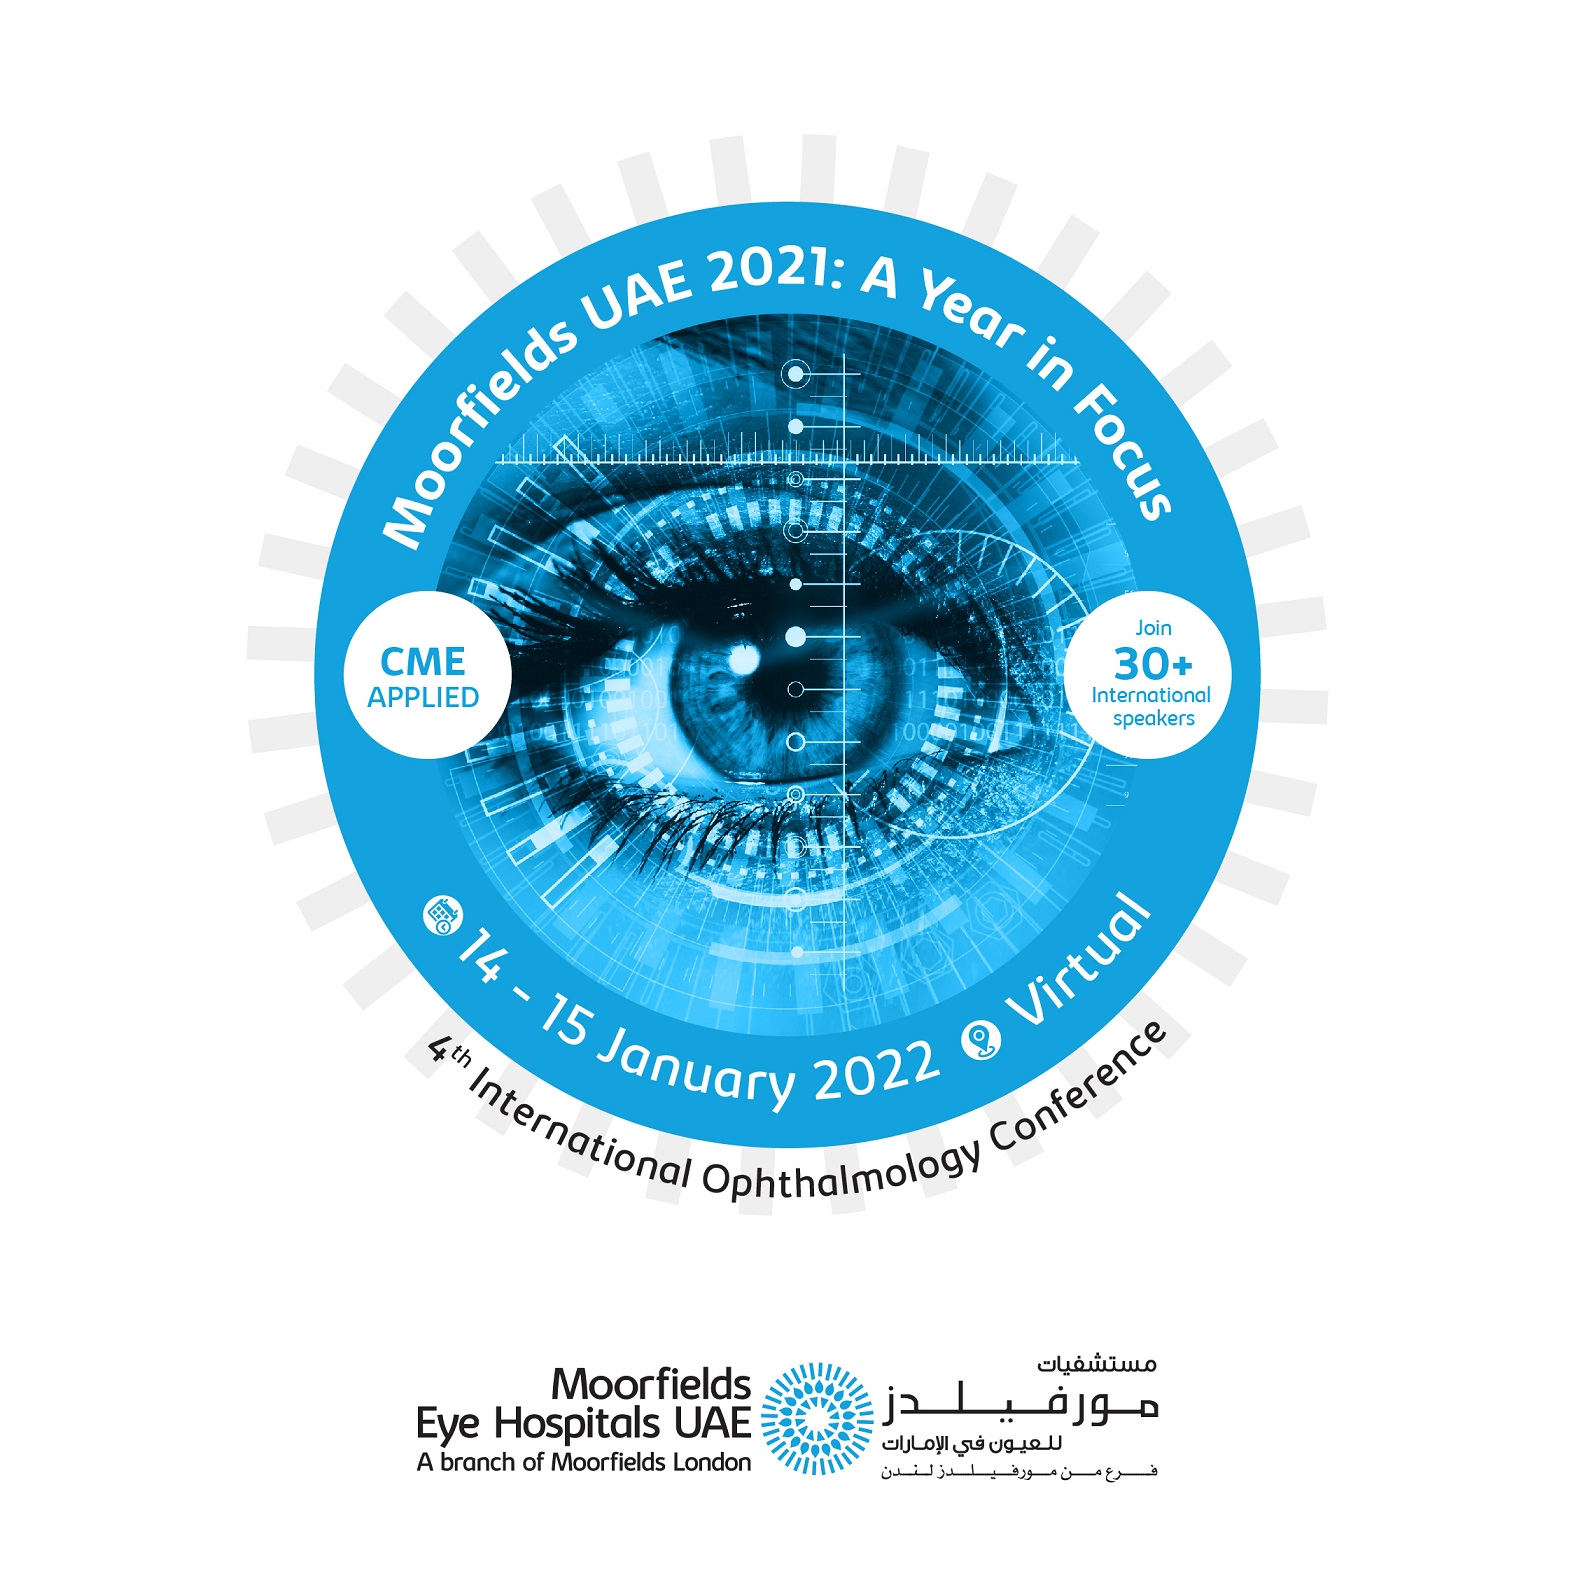 Moorfields Eye Hospitals UAE to host 4th Annual 'A Year in Focus' International Ophthalmology conference